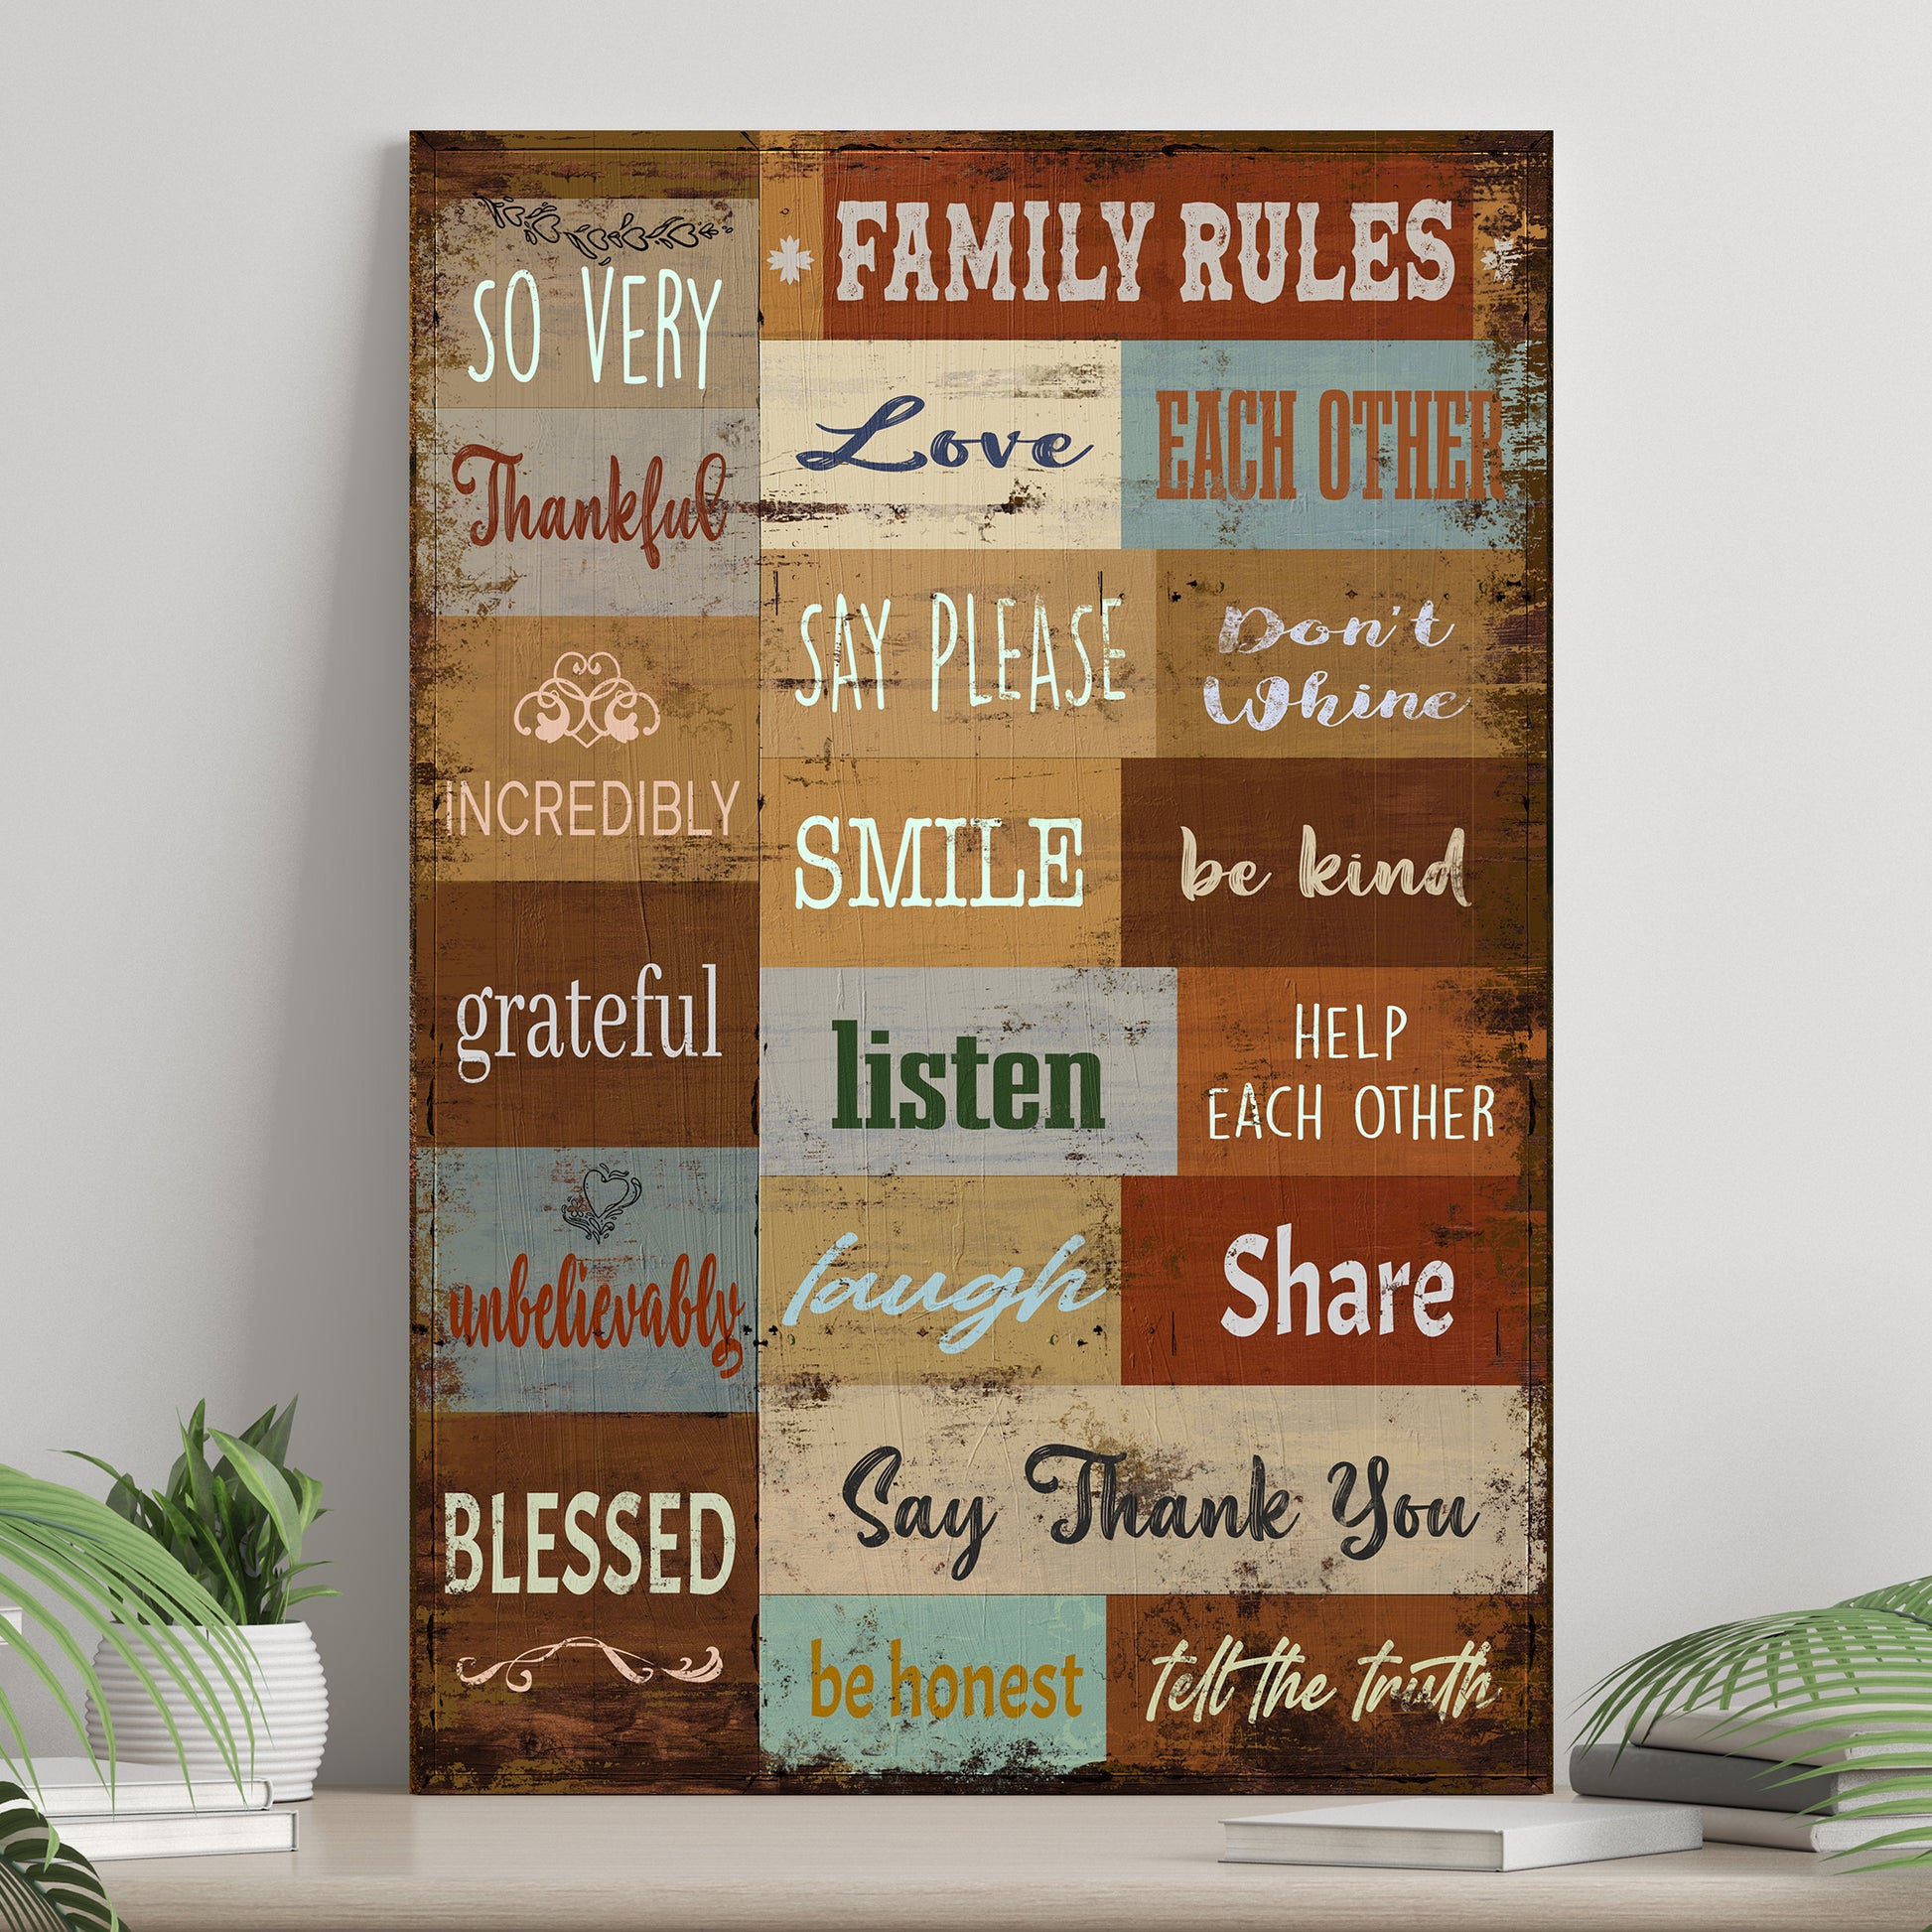 Family Rules Sign - Image by Tailored Canvases